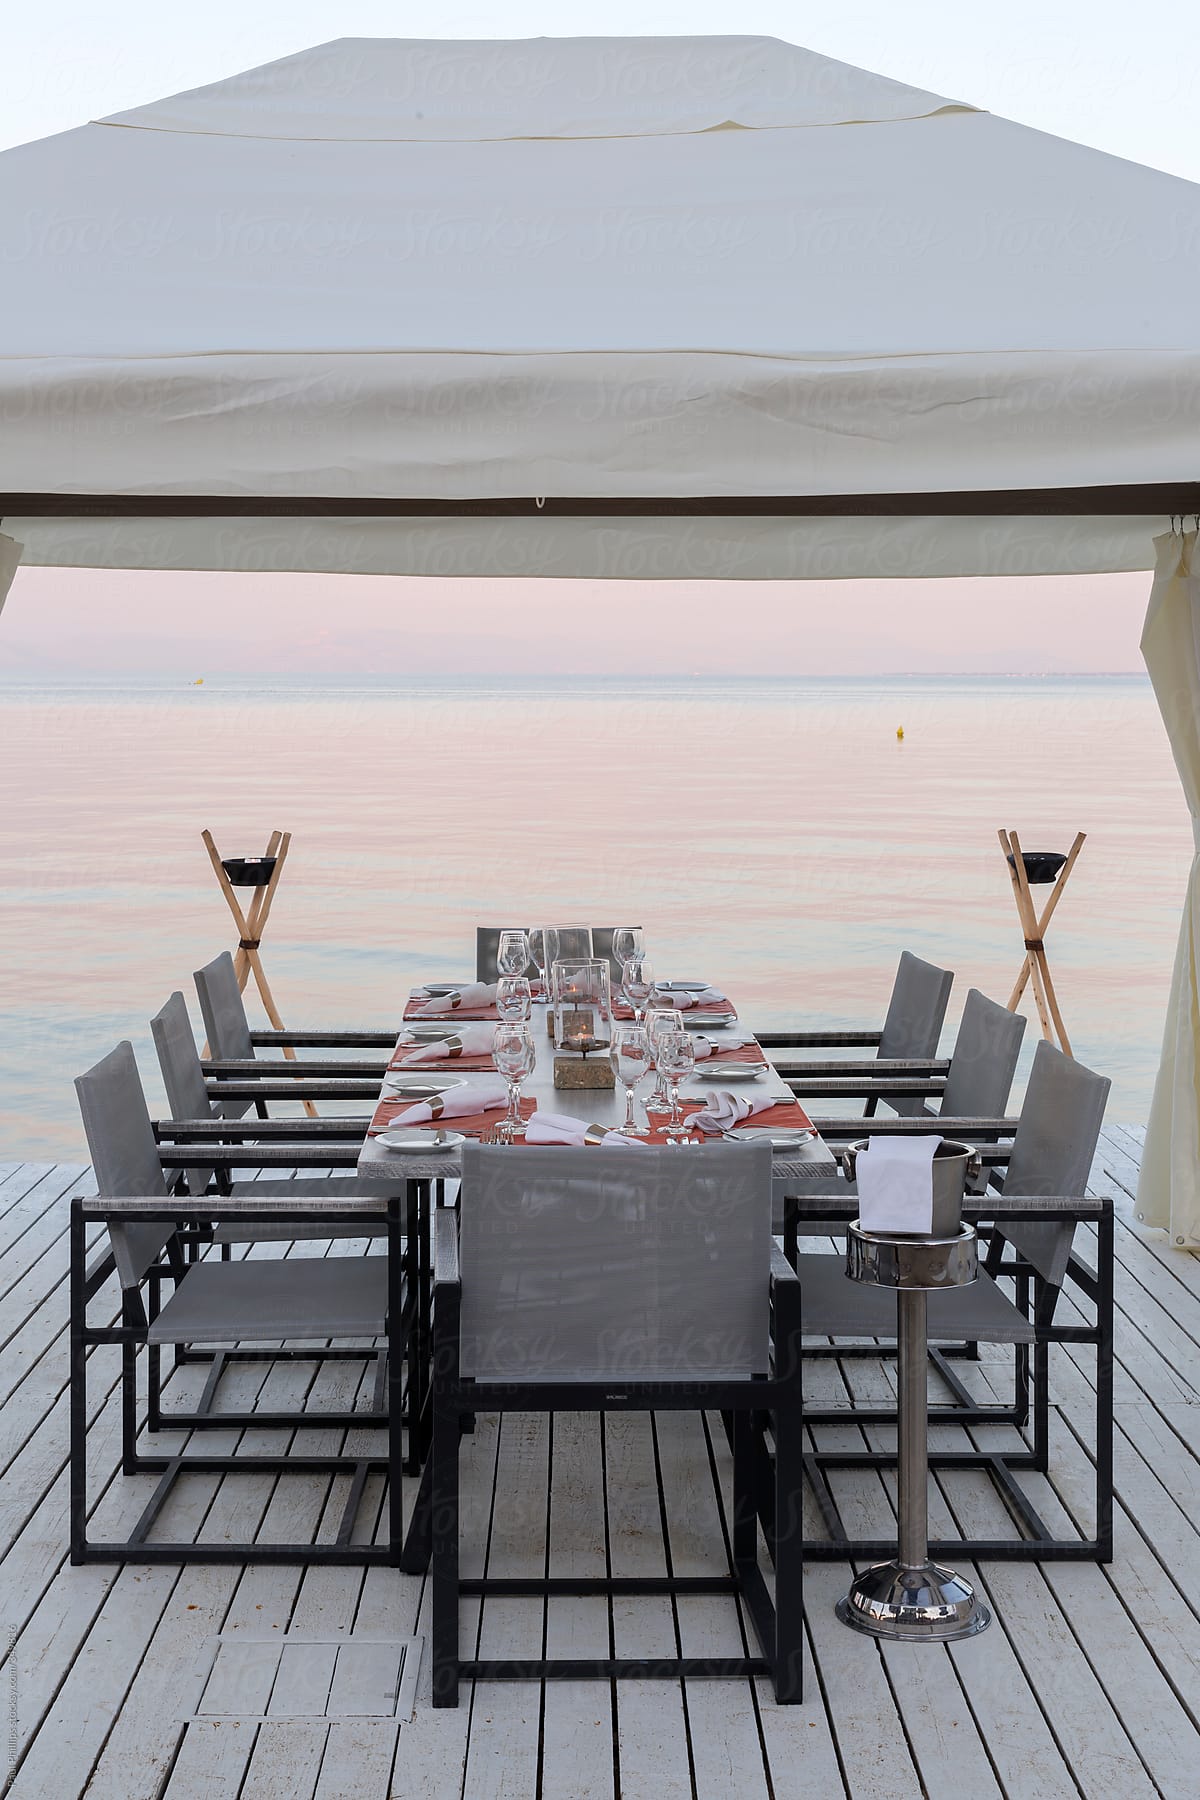 Table set for dinner on the edge of a beach at sunset under a white gazebo